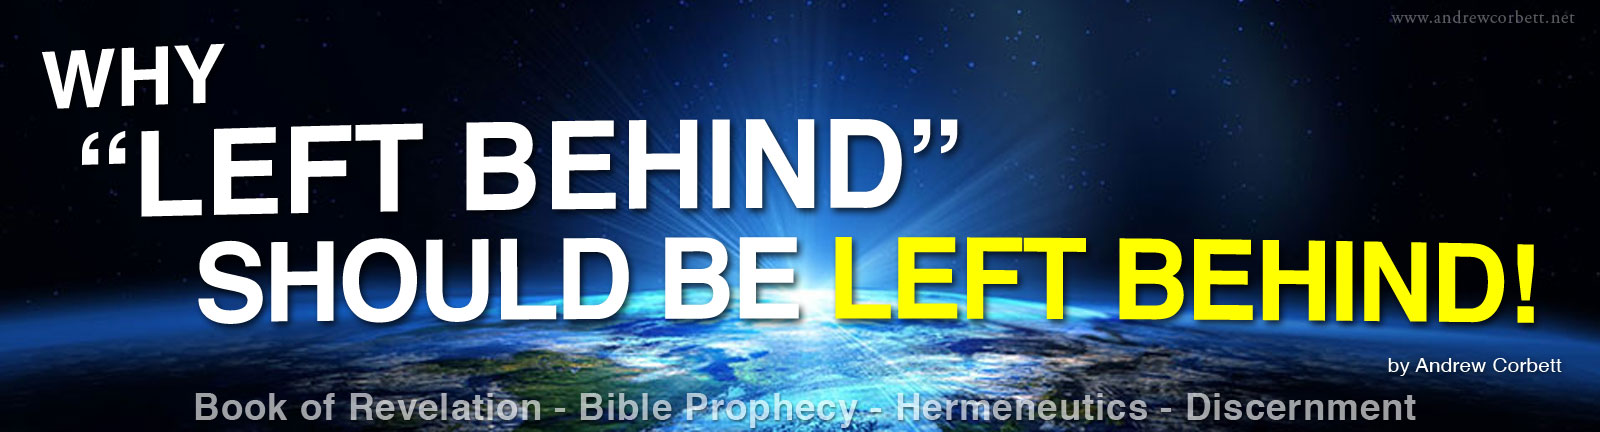 Why "Left Behind" Should Be Left Behind!